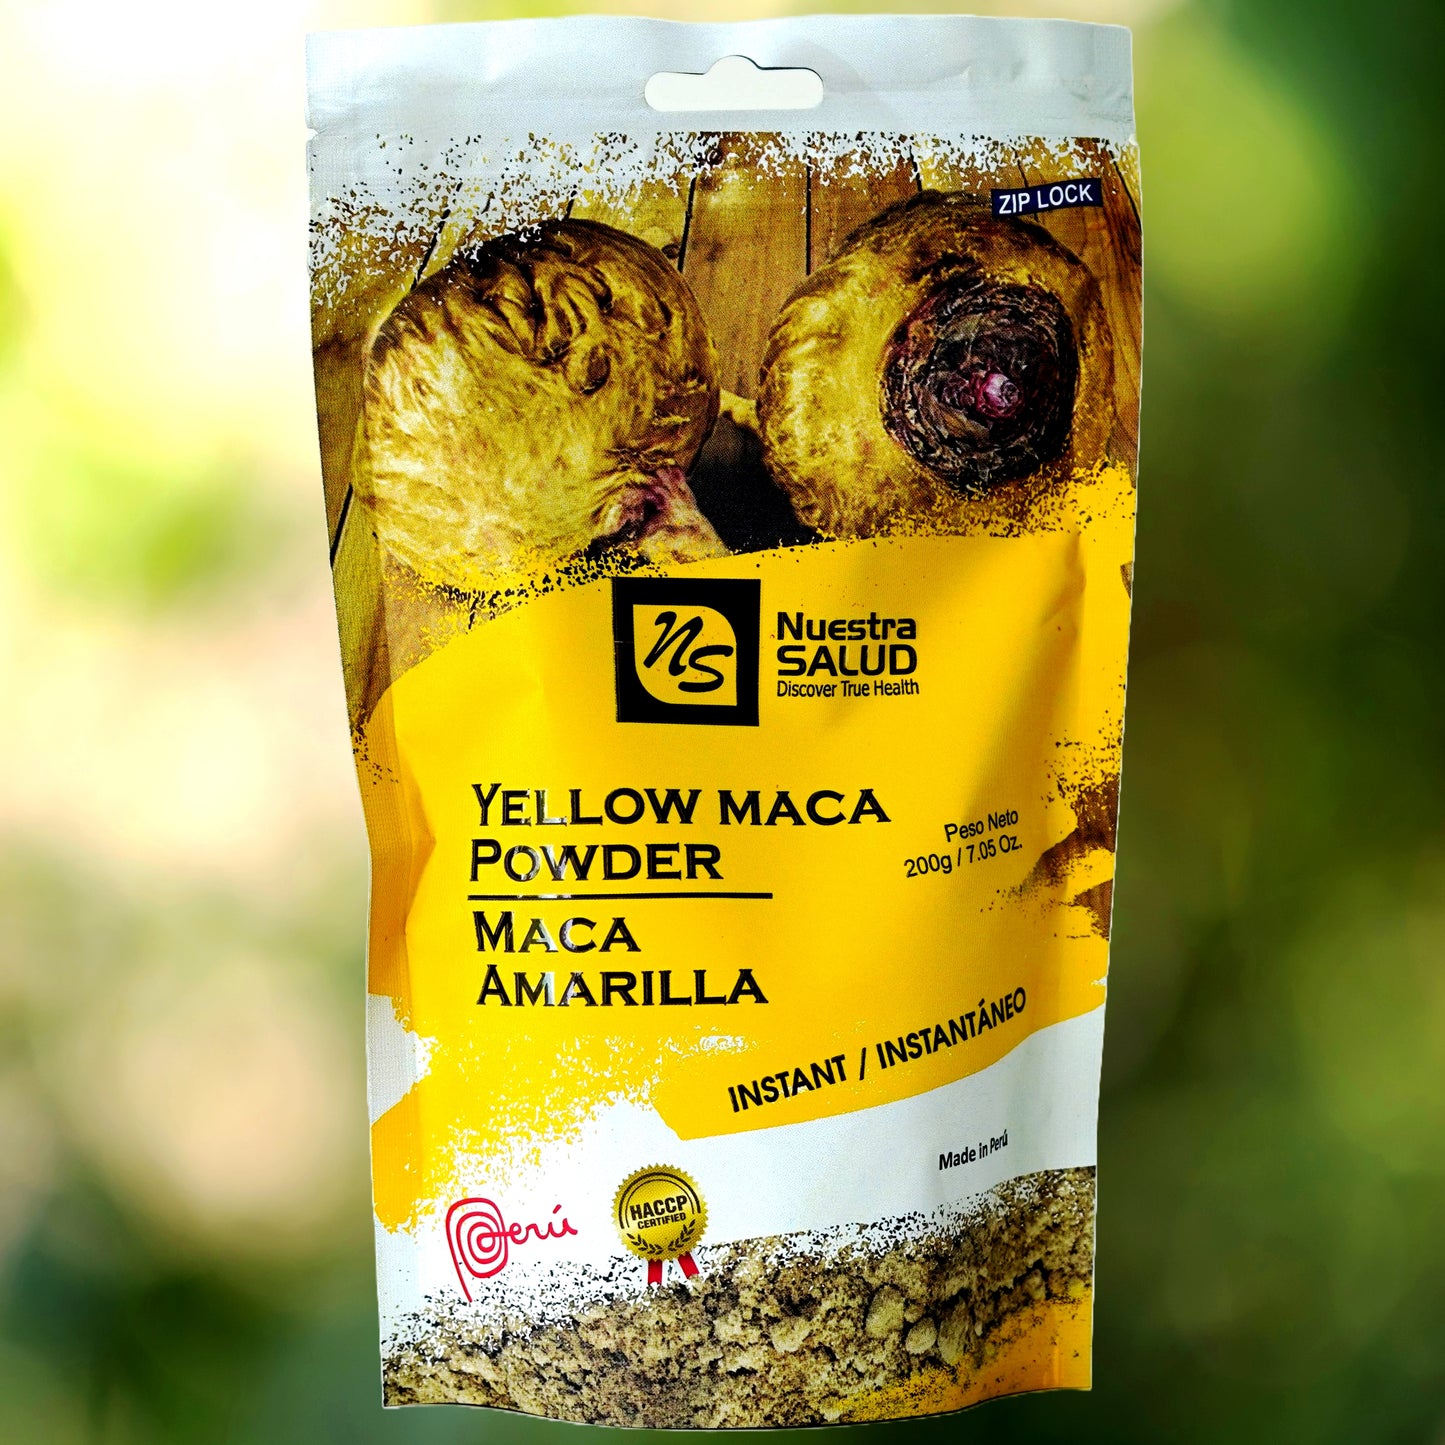 Unleash Golden Yellow Maca Root Powder from Peru Boost Your Vitality Naturally Superfoods (200g)